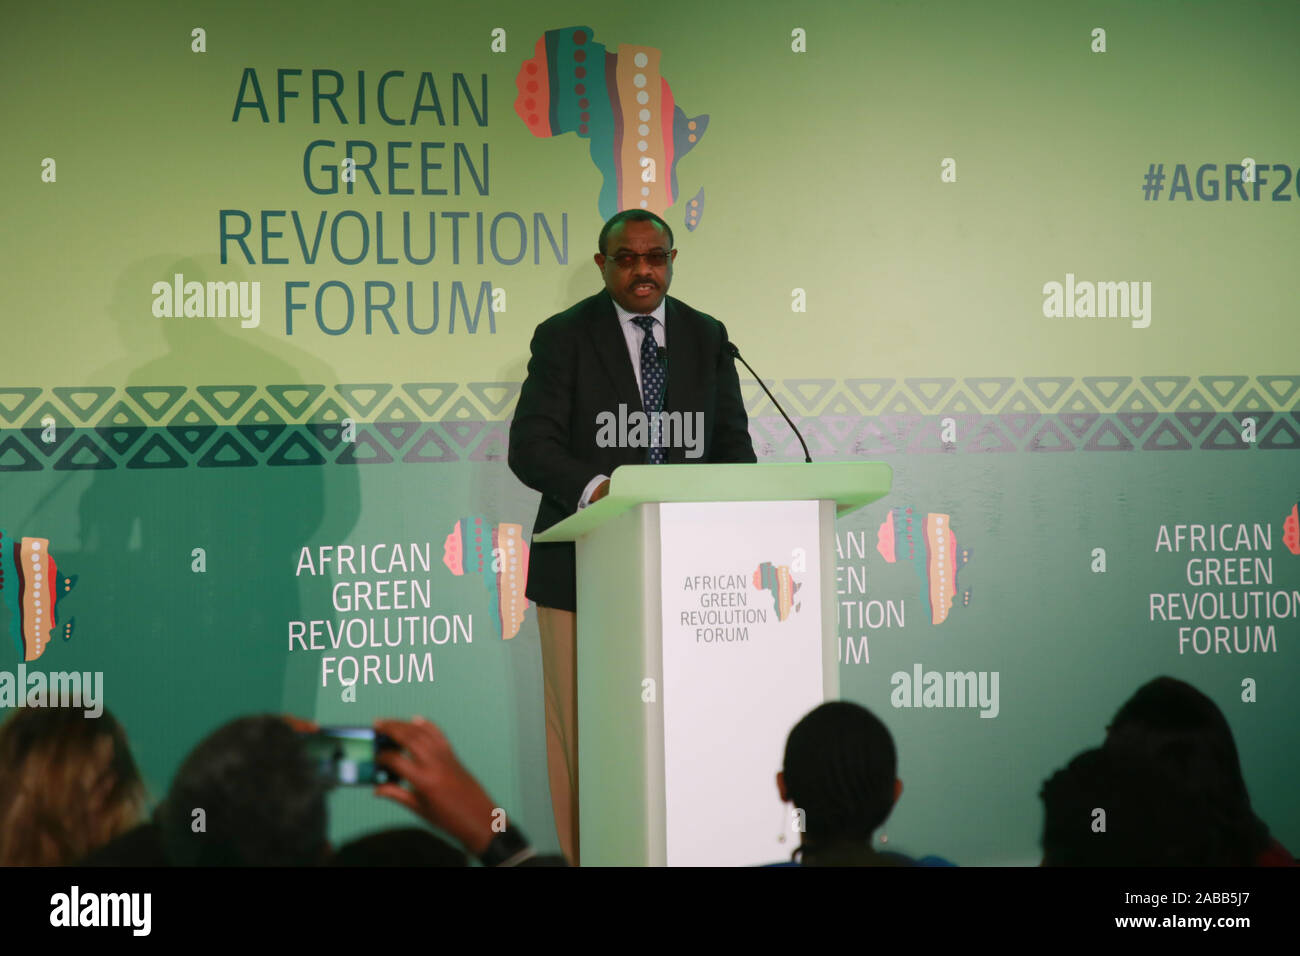 Kigali, Rwanda. 26th Nov, 2019. Hailemariam Desalegn, former prime minister of Ethiopia and board chair of Alliance for a Green Revolution in Africa (AGRA), delivers remarks at an event to launch the African Green Revolution Forum (AGRF) 2020 Summit in Kigali, capital city of Rwanda, Nov. 26, 2019. New apporaches were emphazized on Monday in Rwanda's Kigali to address 'rising' cases of hunger and food insecurity challenges in Africa. Credit: Lyu Tianran/Xinhua/Alamy Live News Stock Photo